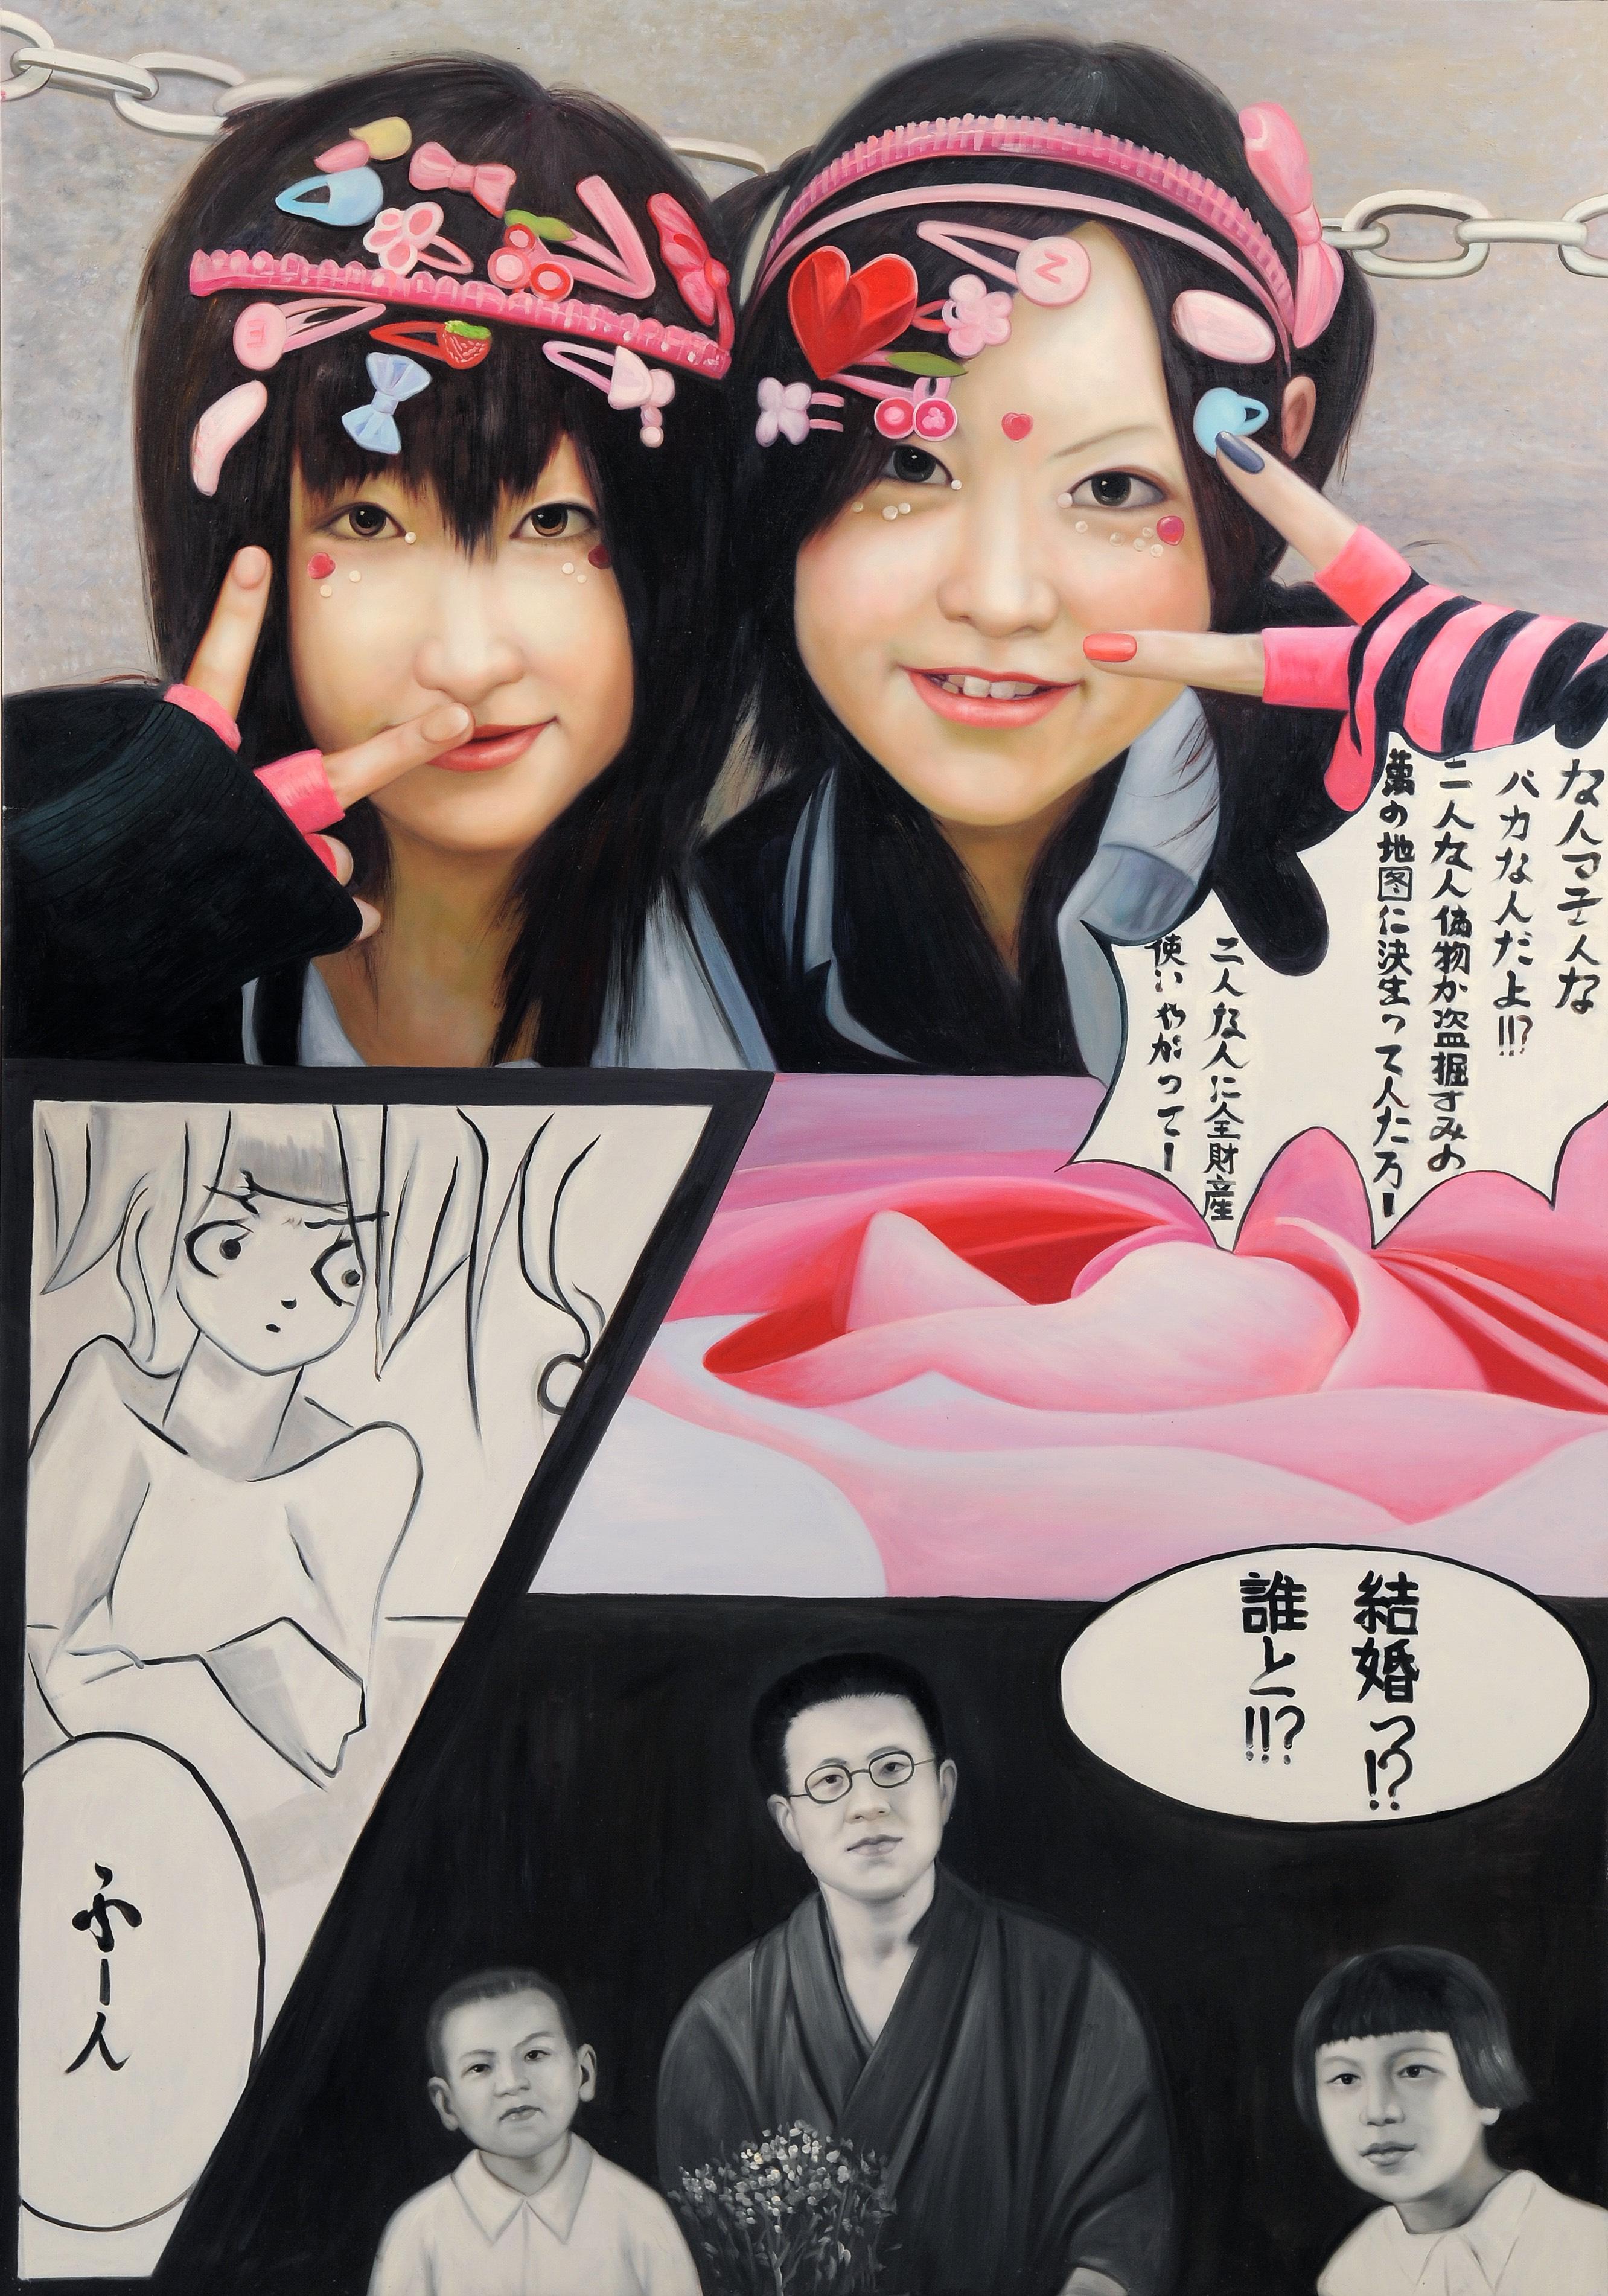 Twins : Duality in Manga Hue, A Tokyo Mirror - Painting by JIMMY YOSHIMURA